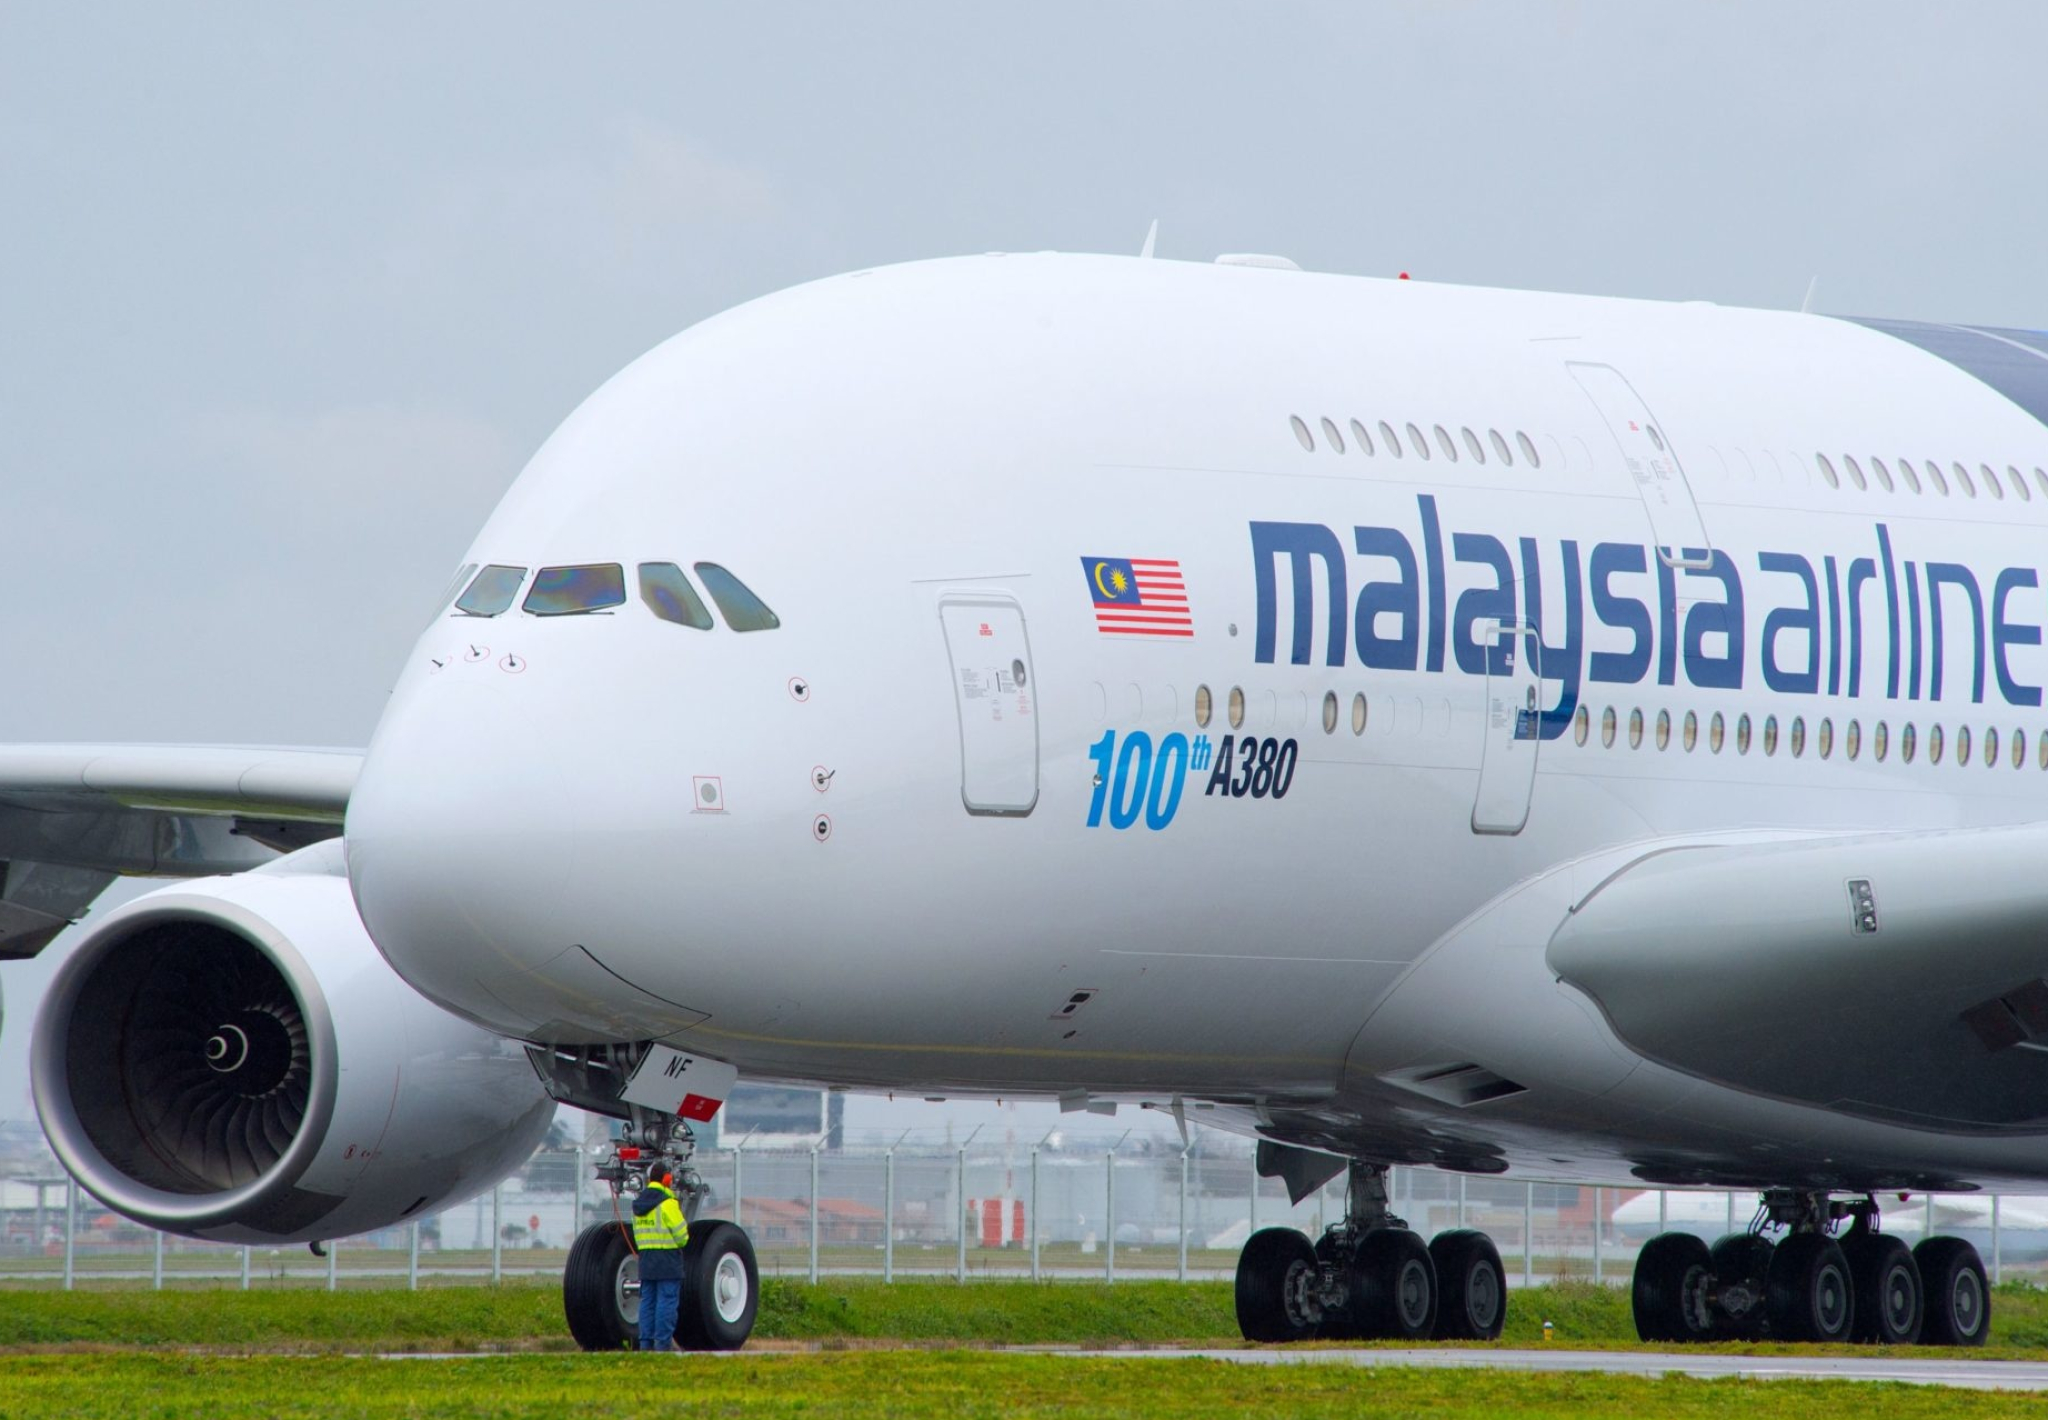 Malaysia Airlines CEO, Airbus A380, Charter demand, Future of aviation, 2050x1420 HD Desktop